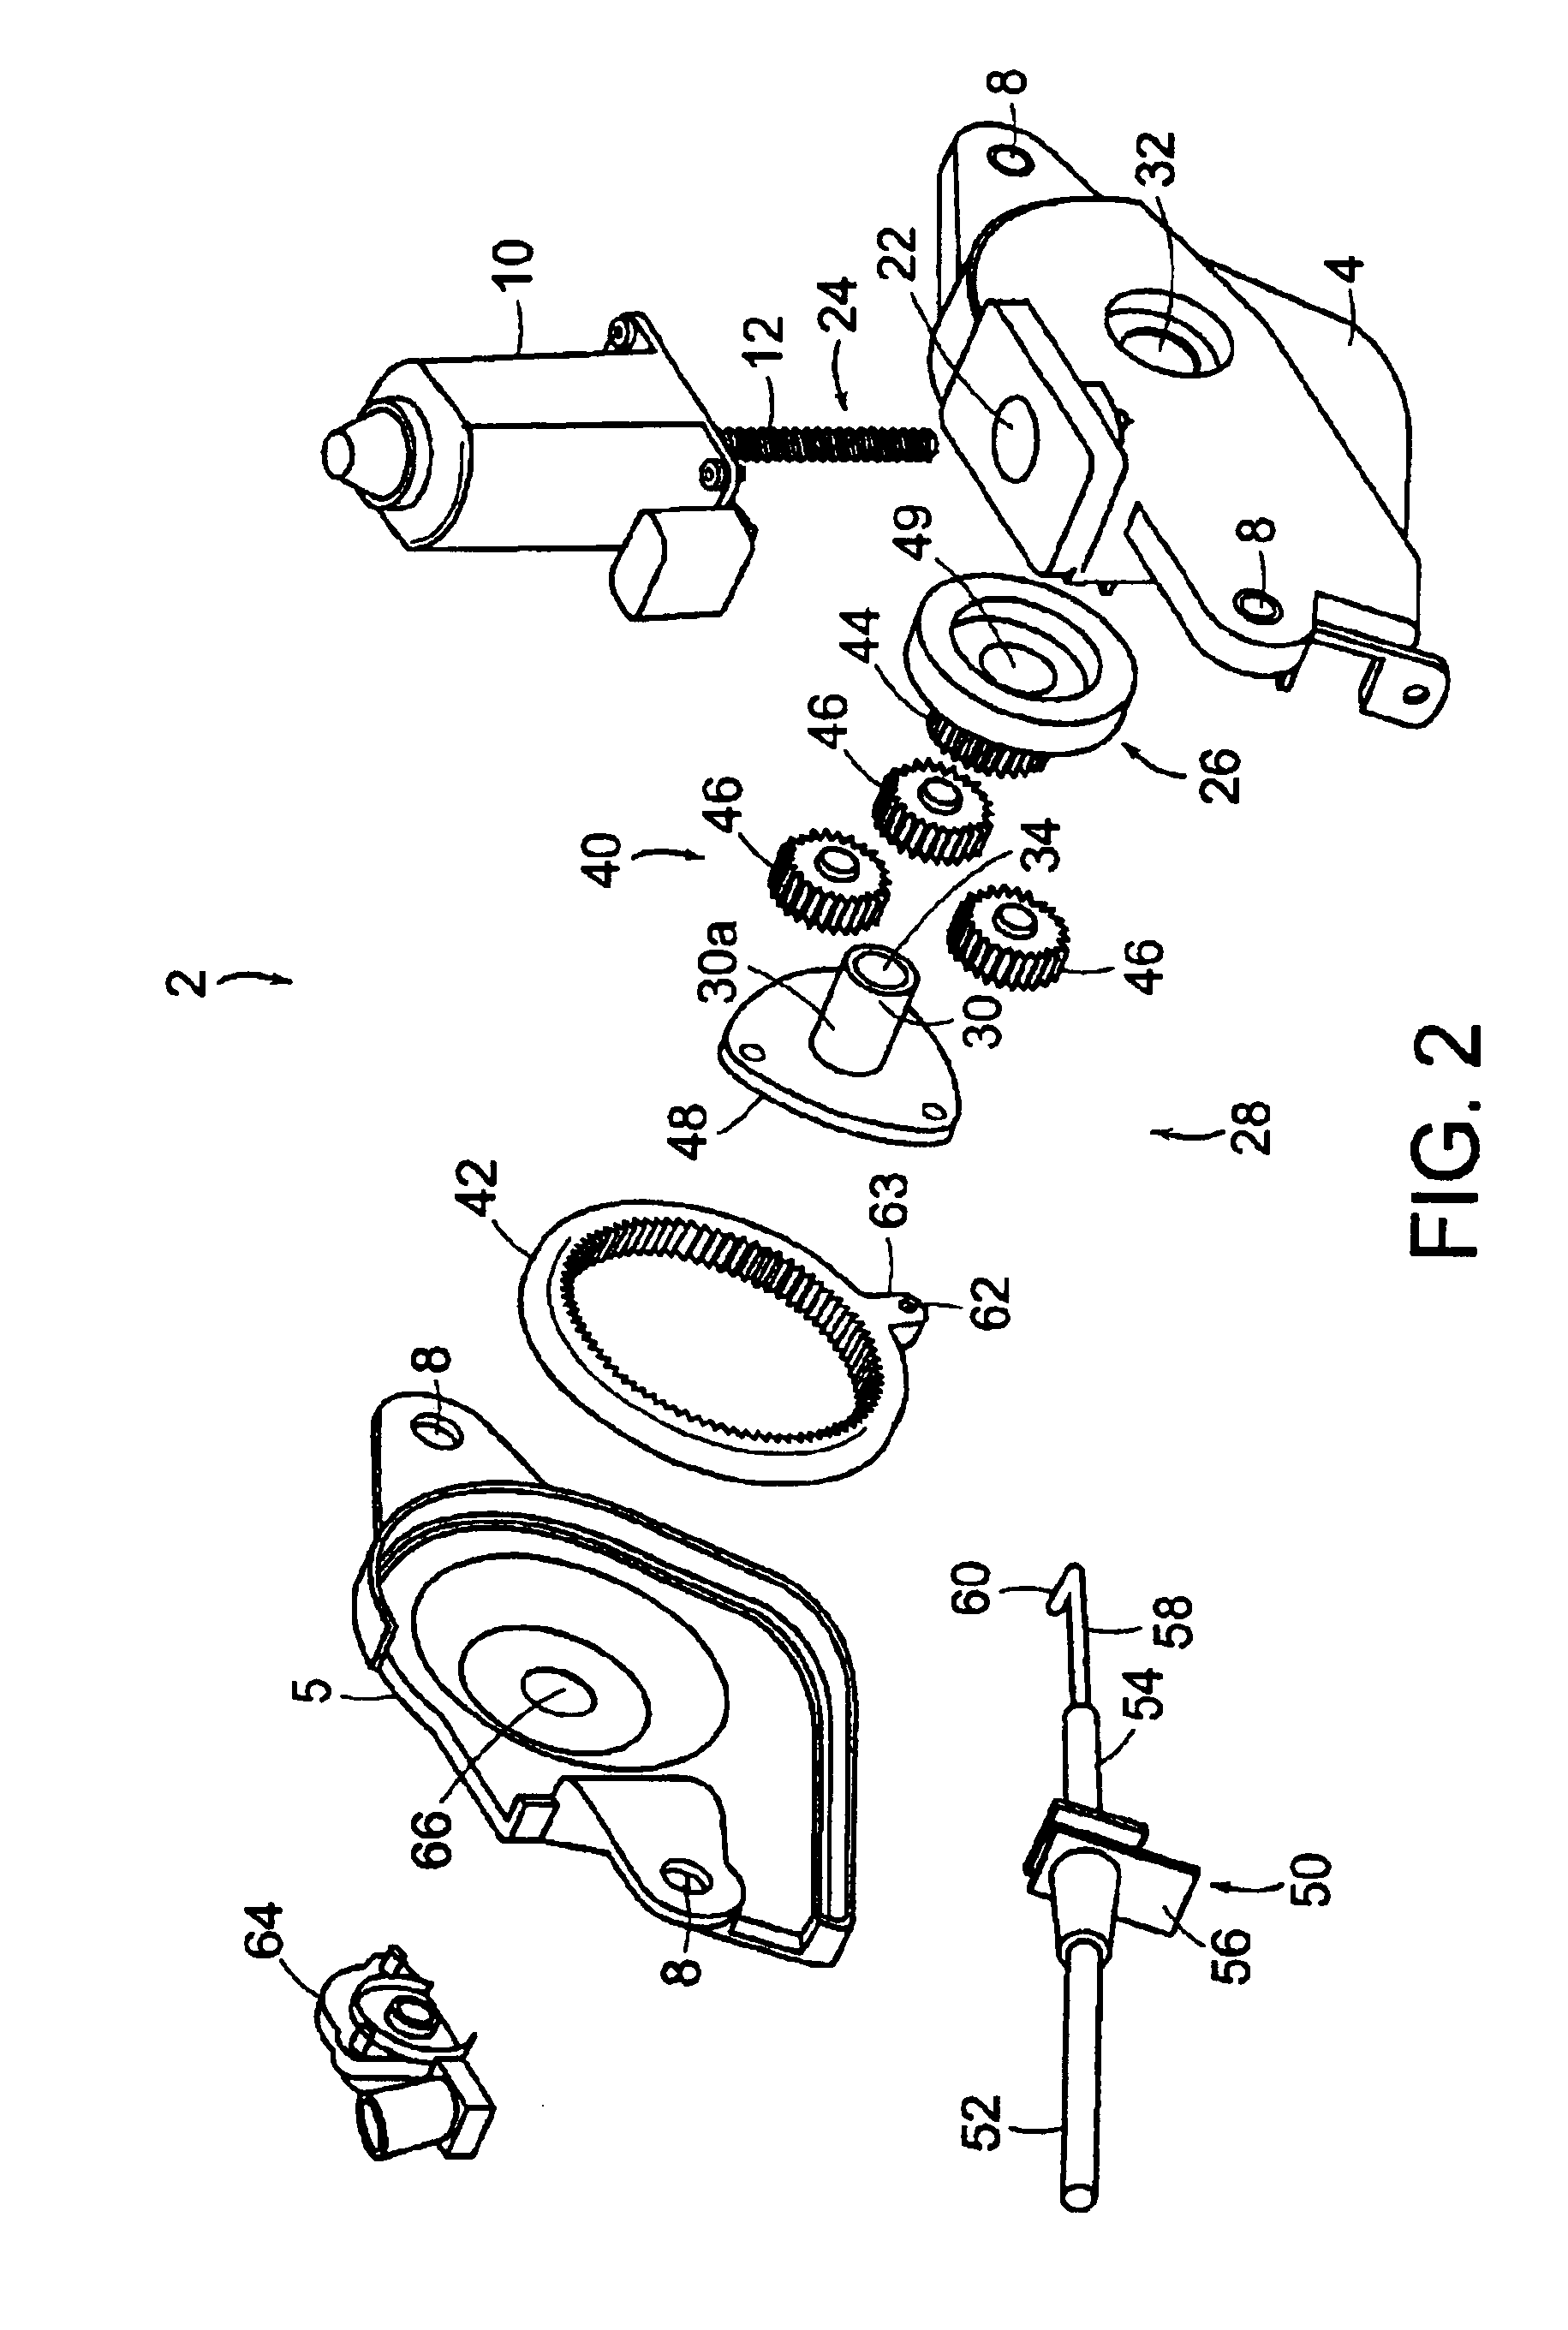 Shift-by-wire transmission actuator assembly